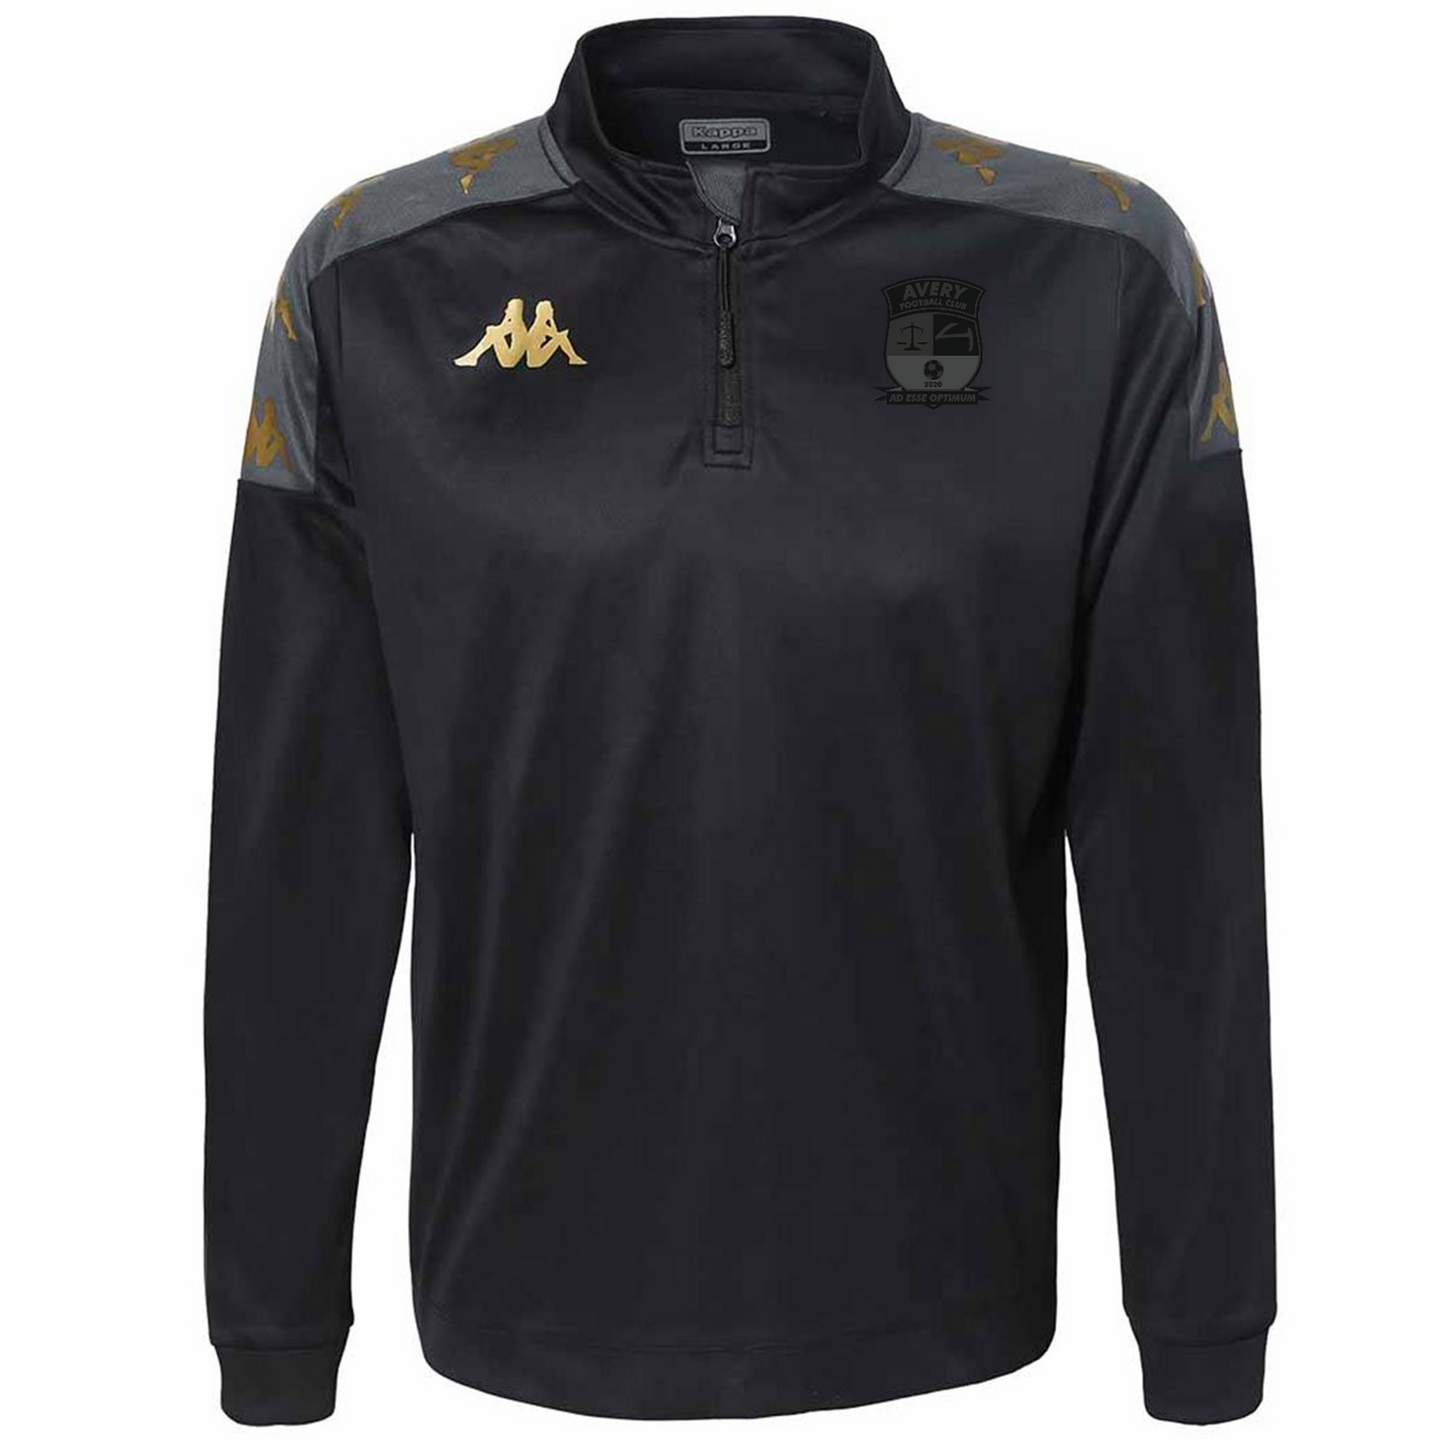 Avery FC - Managers 1/4 Zip Midlayer - Black [Gassio]